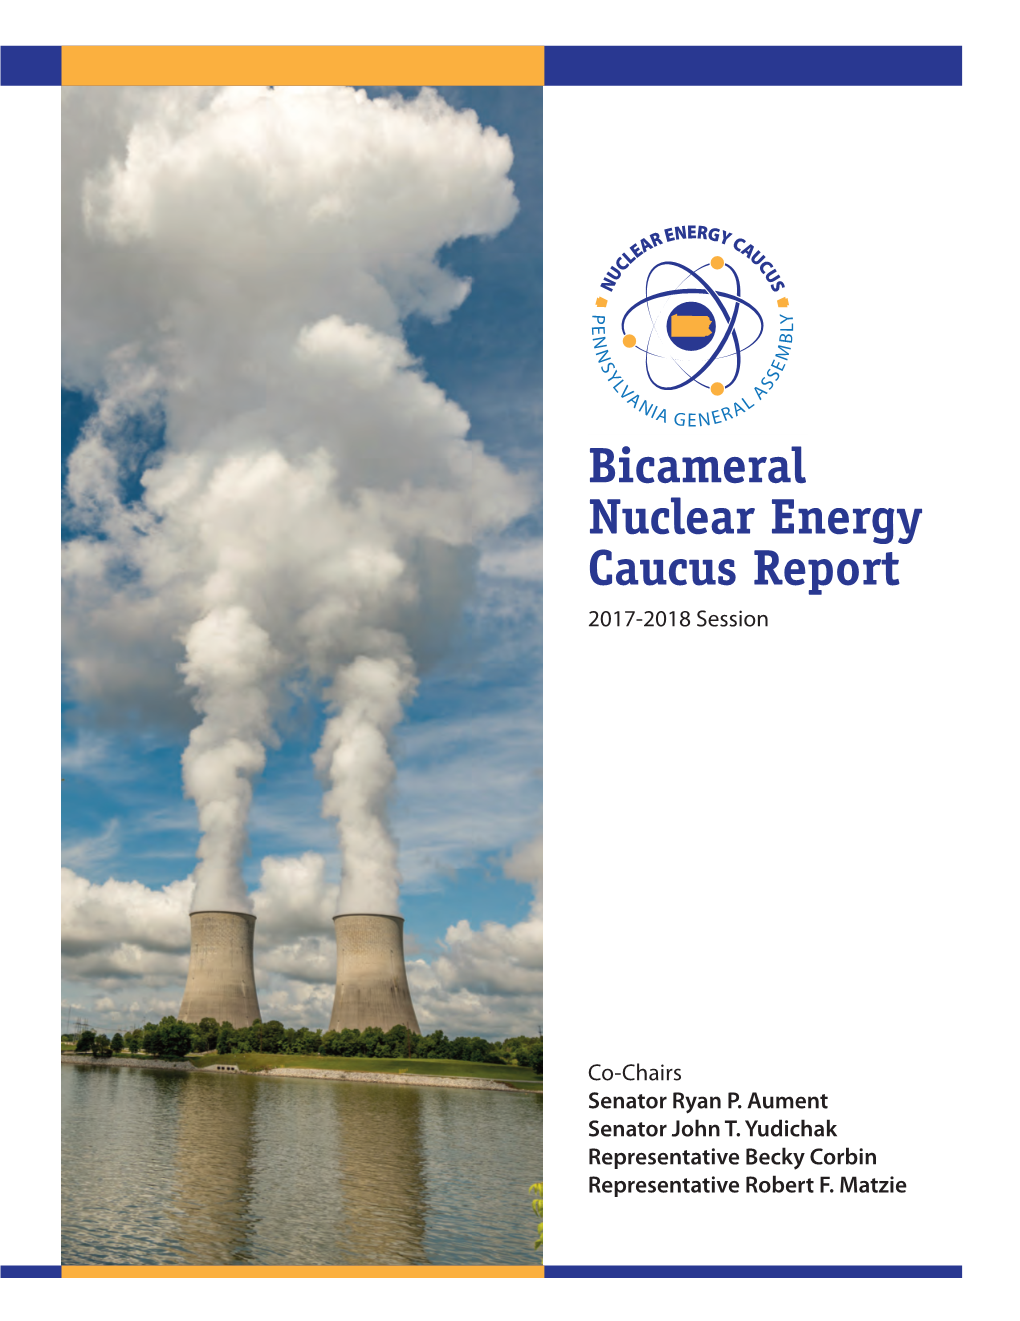 Bicameral Nuclear Energy Caucus Report | 2017-2018 Session